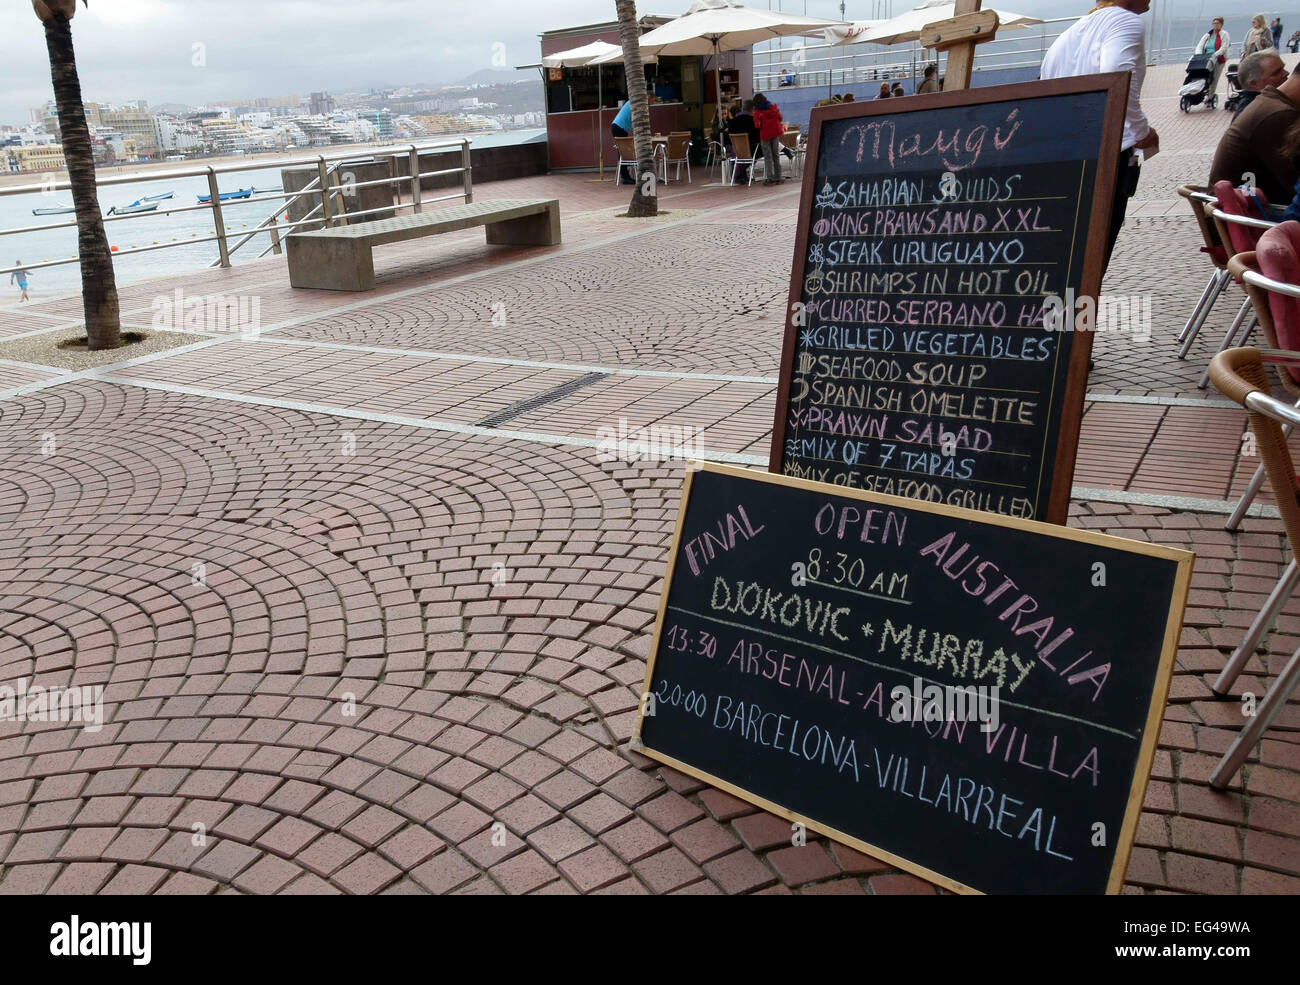 Board announcing British sports fixtures outside restaurant in Canary Islands, Spain Stock Photo